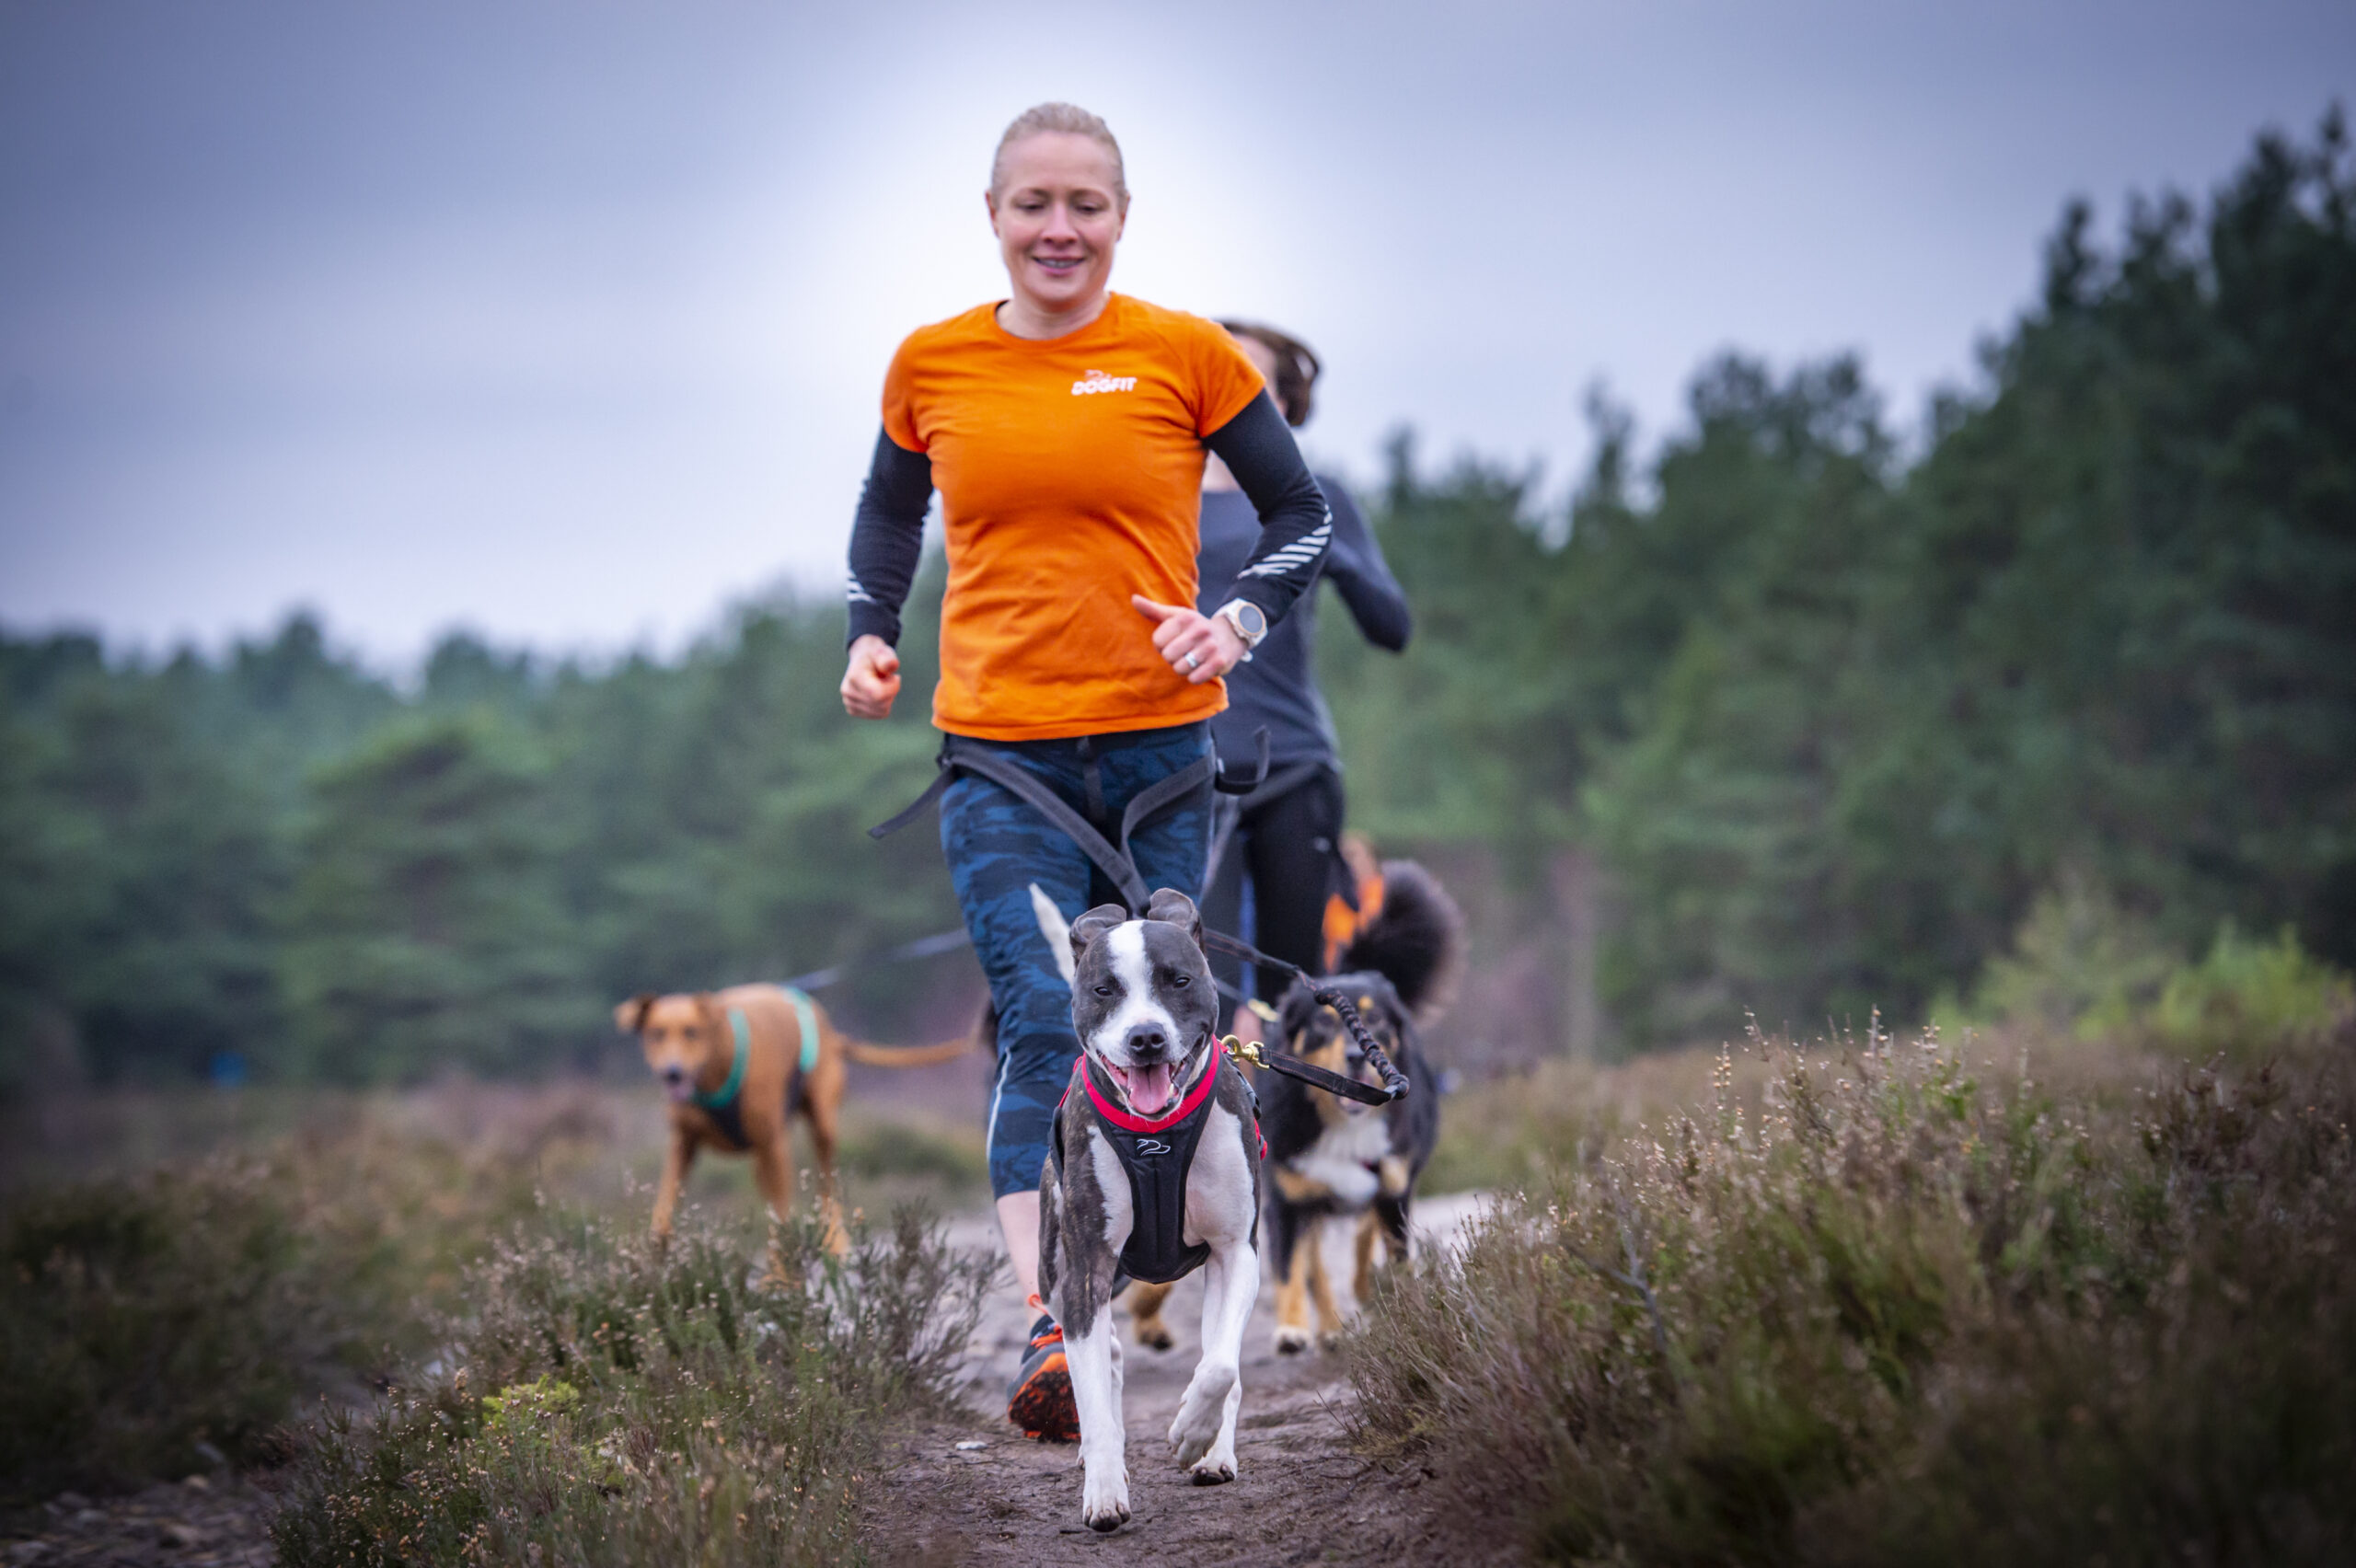 ultra runners do canicross with their dogs